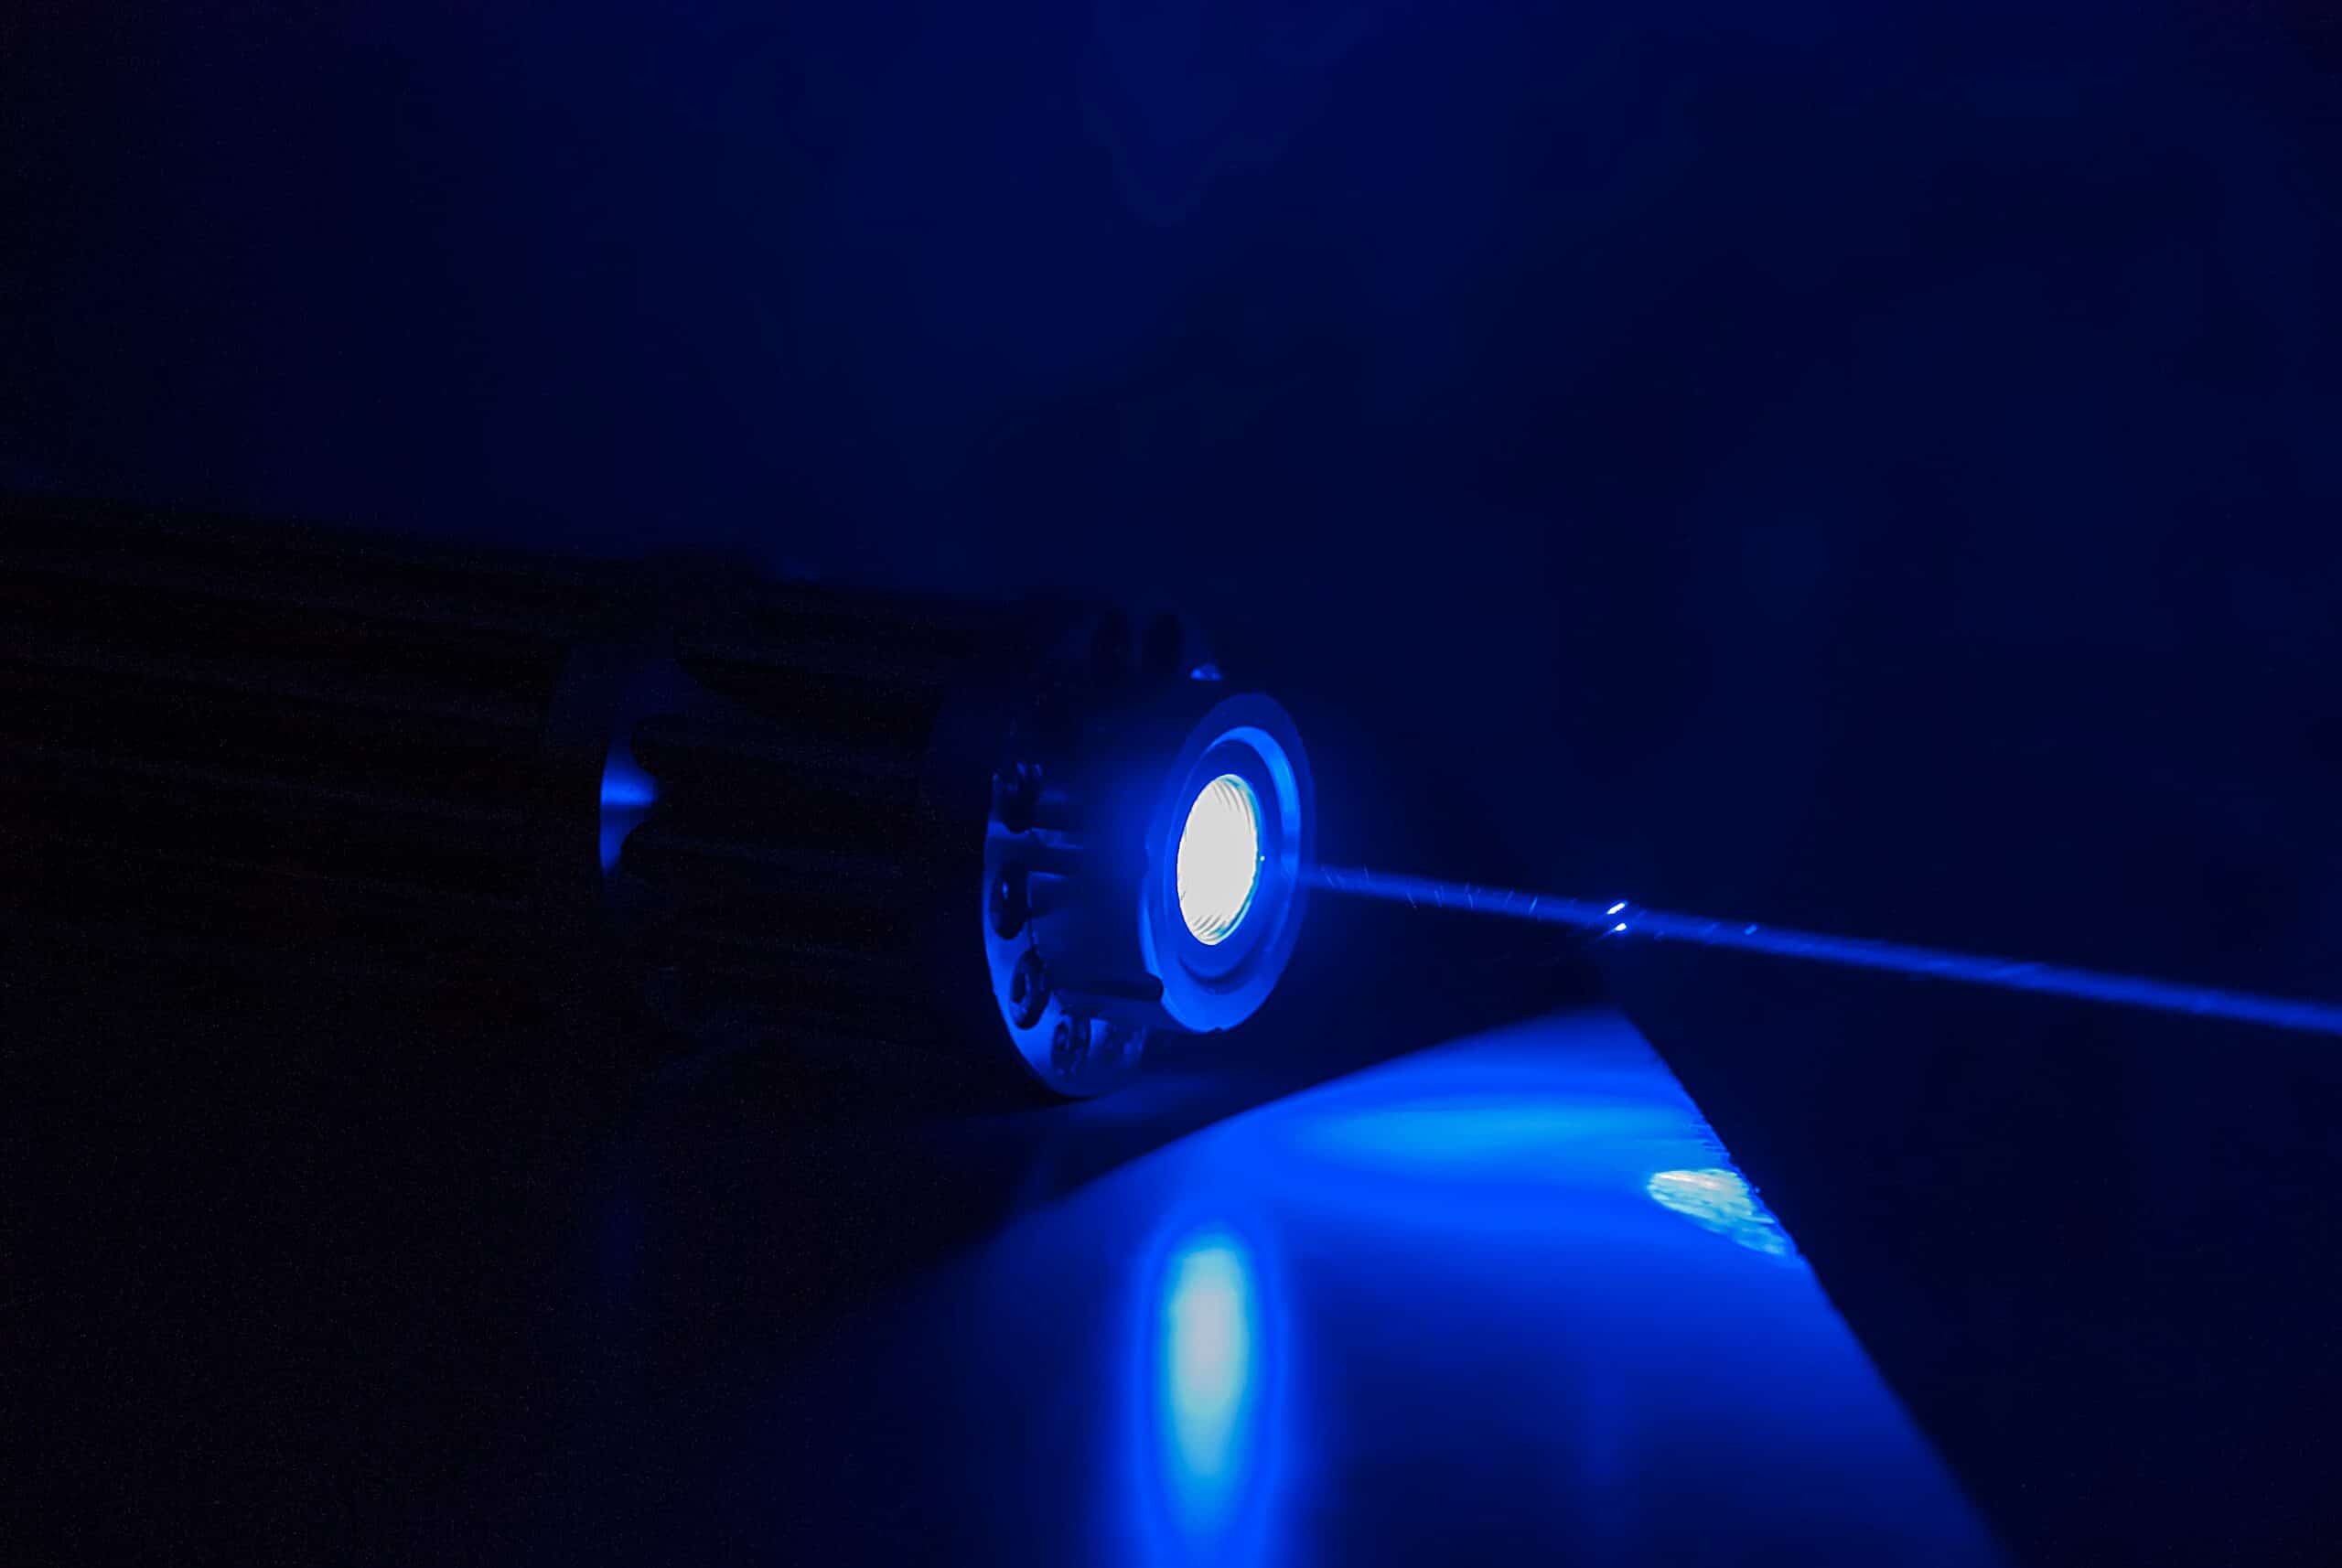 Learn More About the History of Lasers